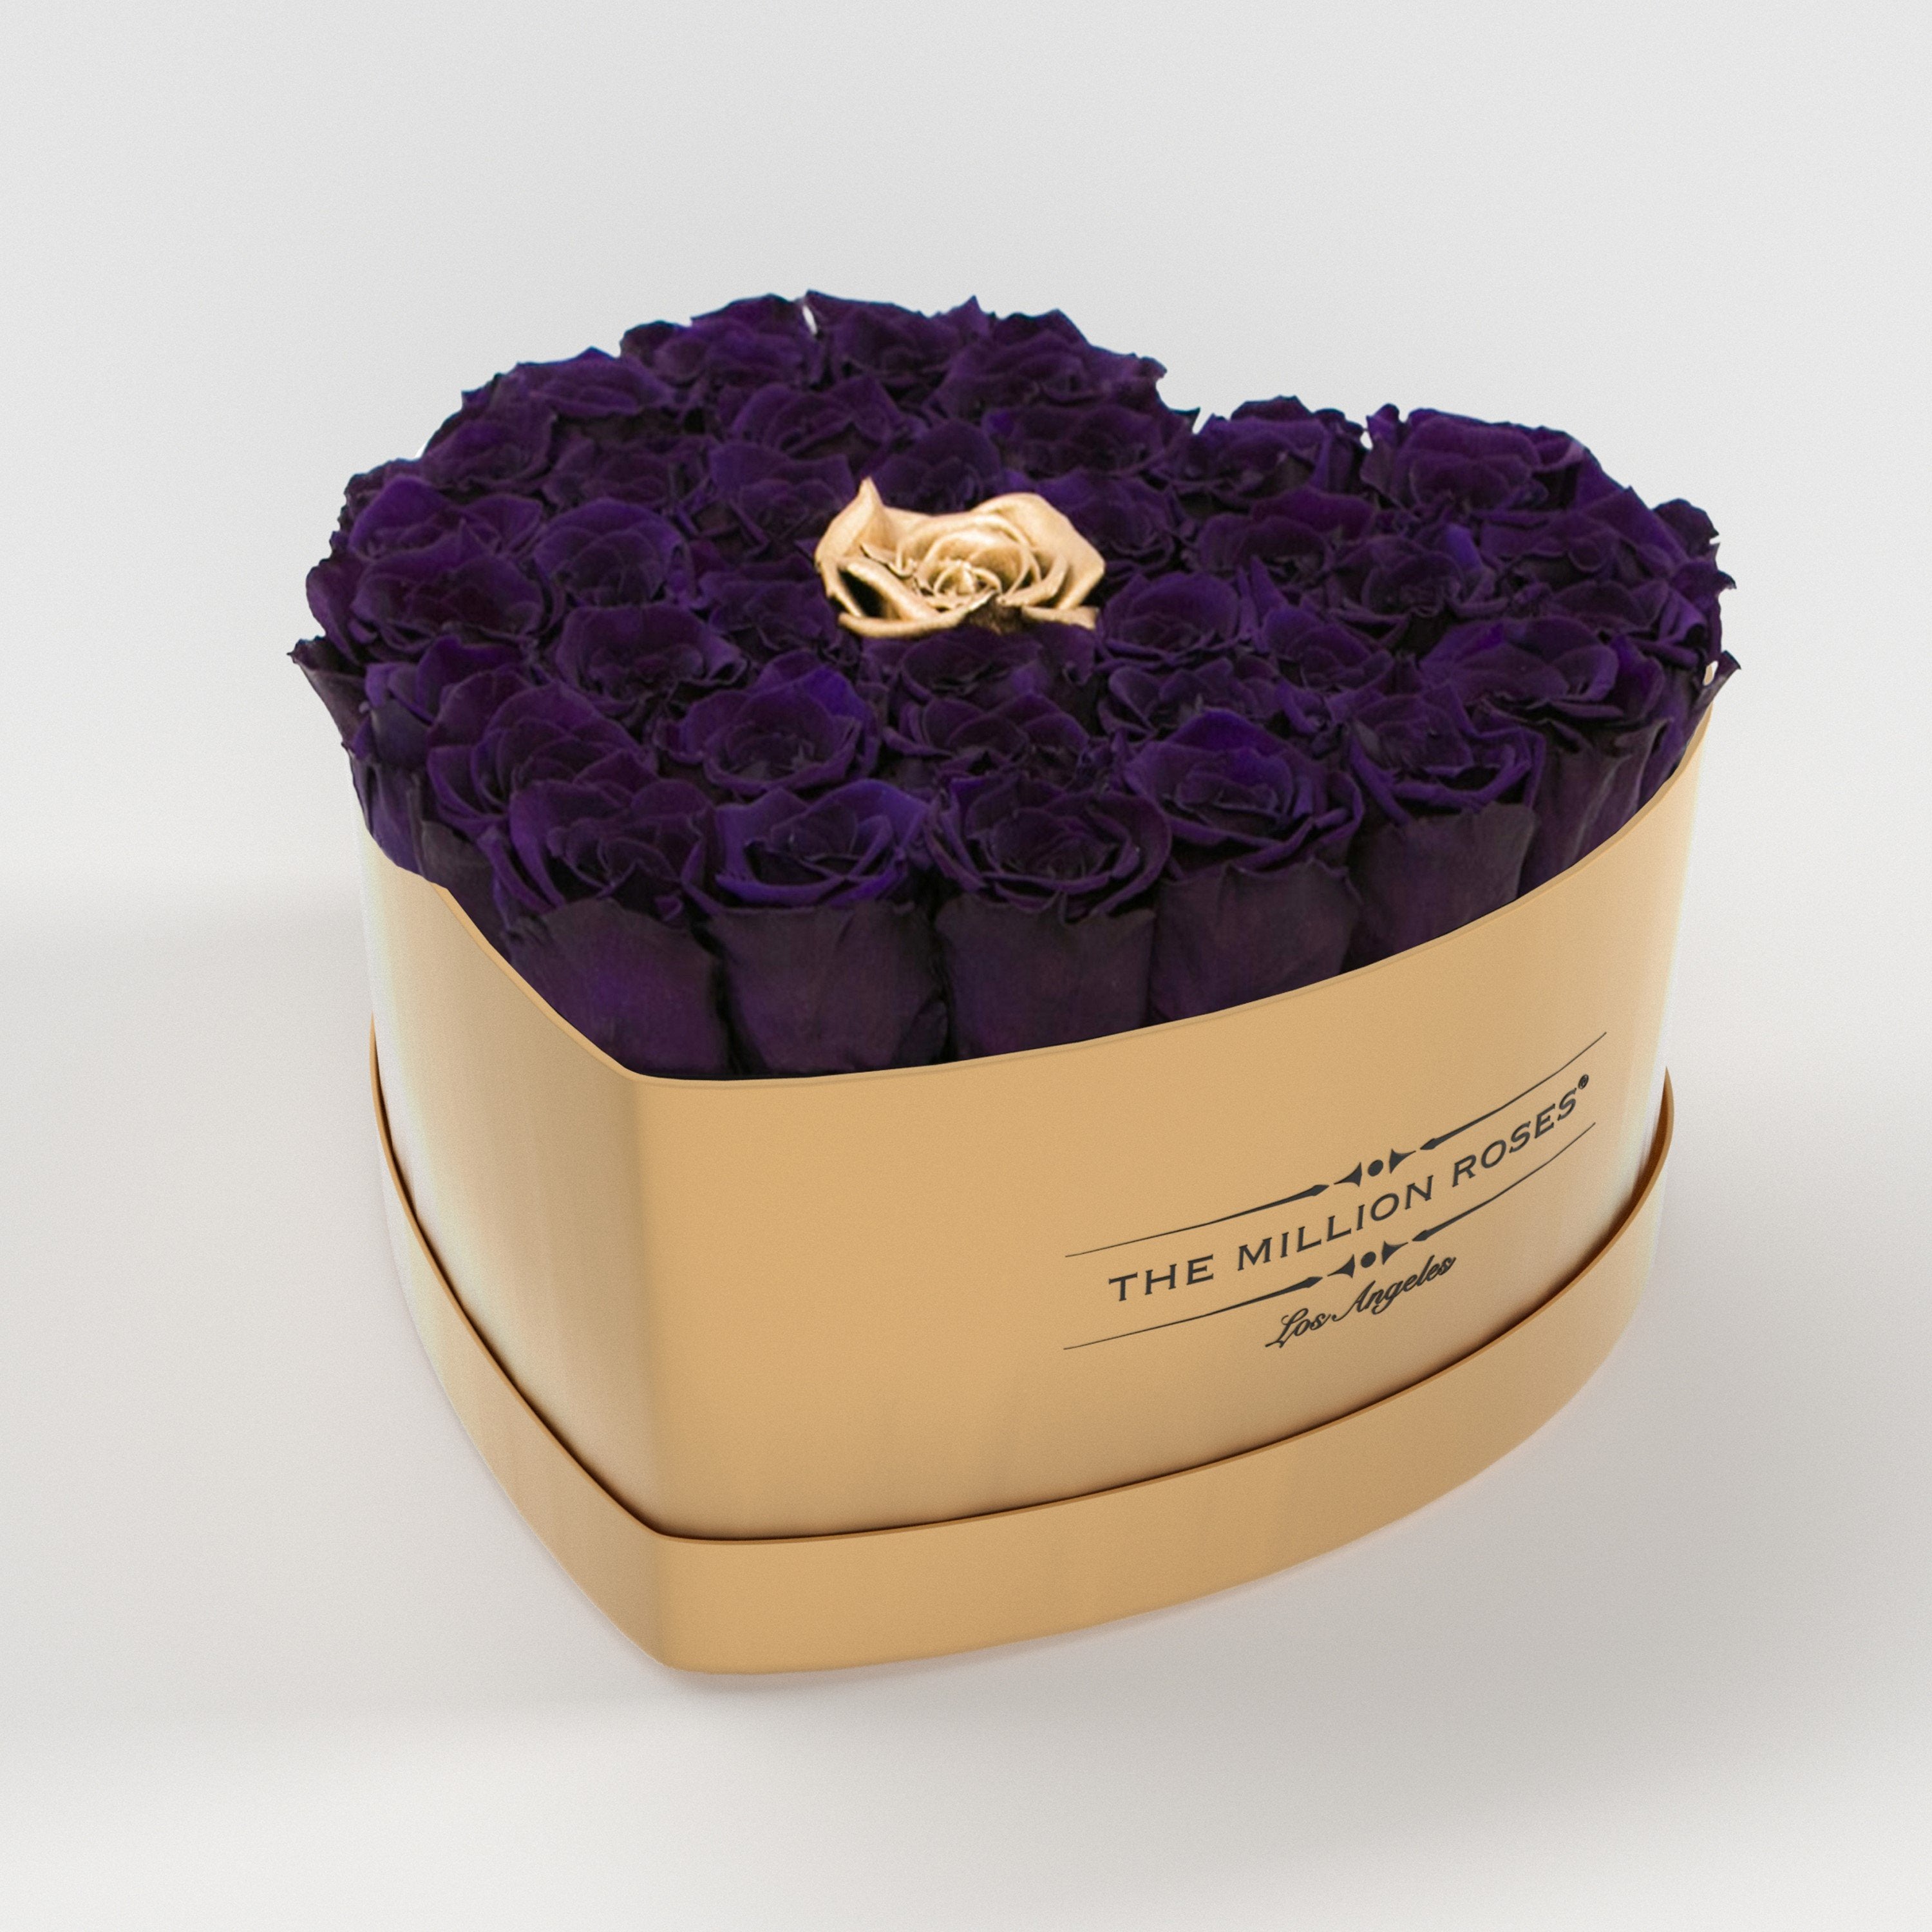 ( LA ) Gold - Love Box with Dark Purple and Gold ( 1 gold in middle ) Roses Kit - the million roses